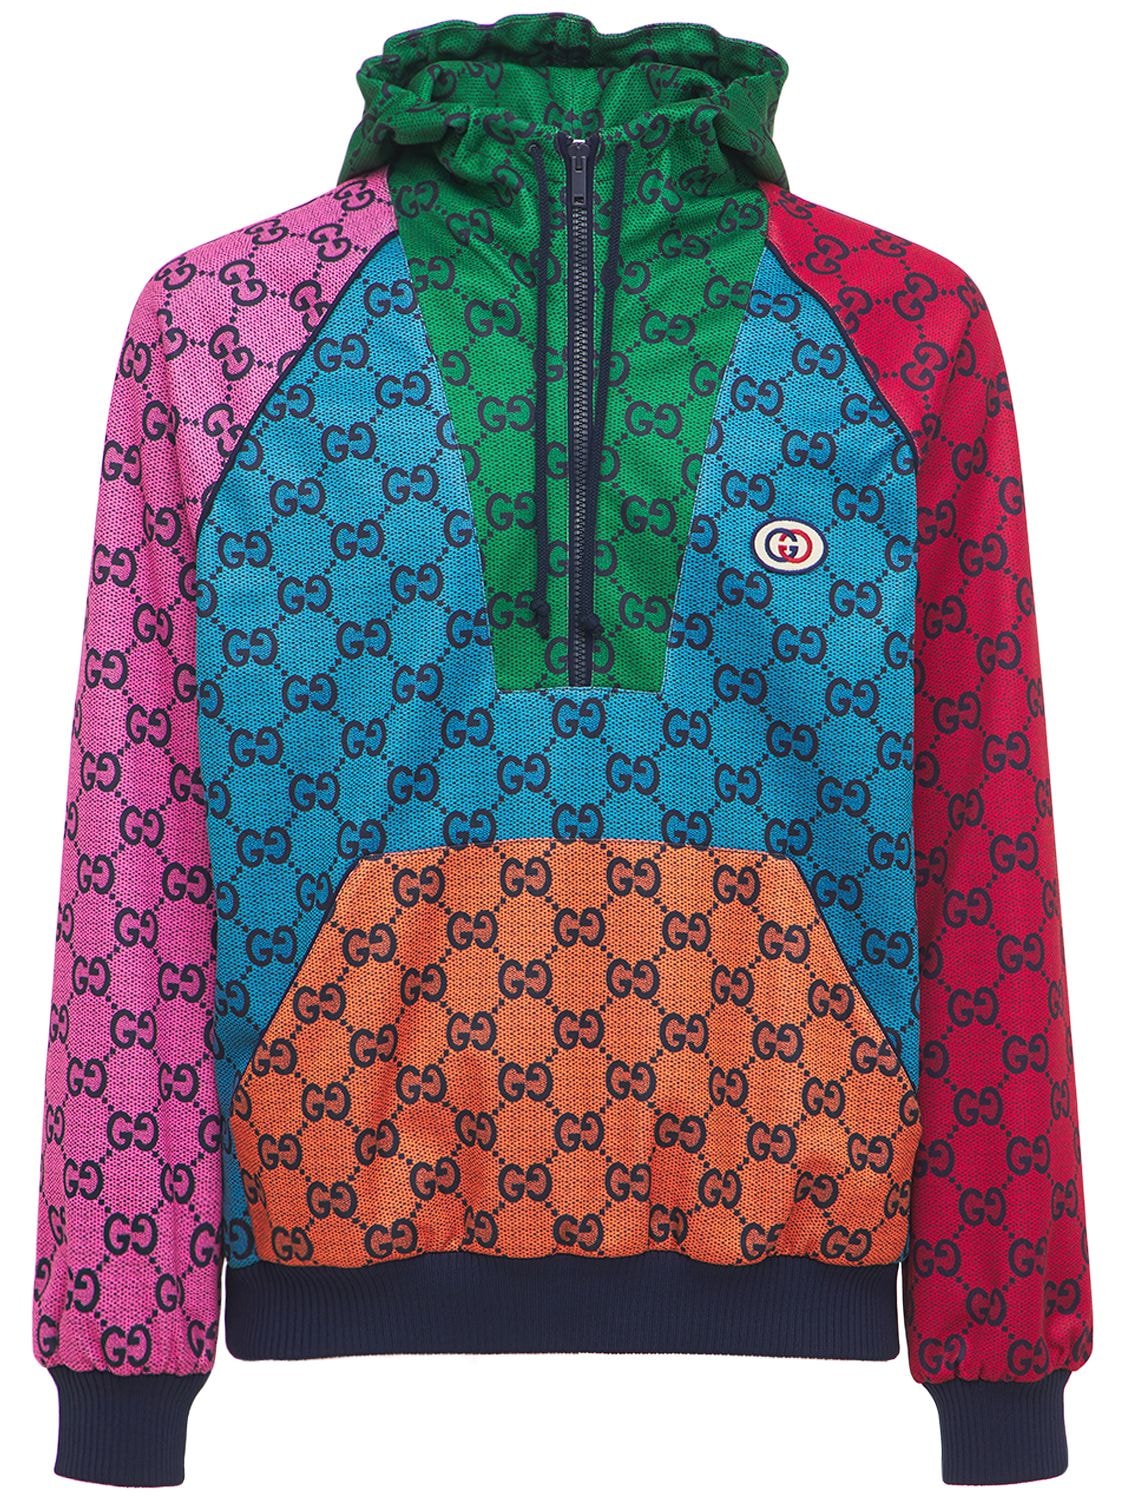 Gucci GG Multicolour Jersey Hoodie in Blue for Men